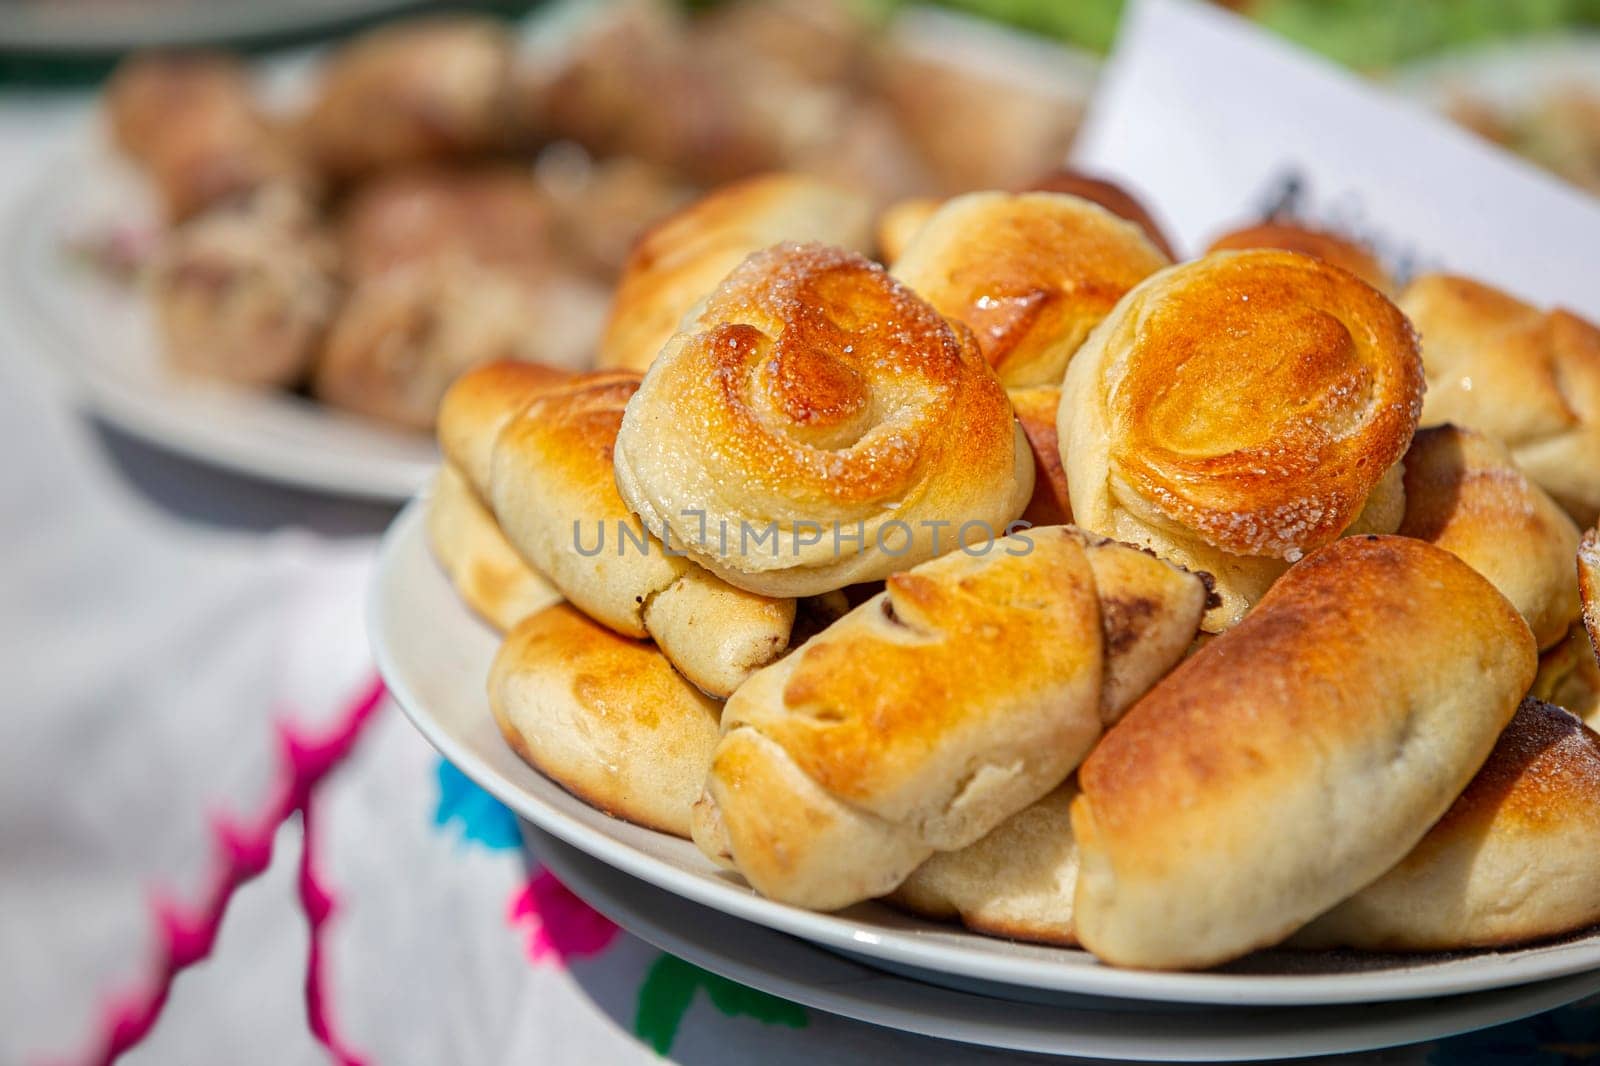 On a plate are yeast buns sprinkled with sugar.